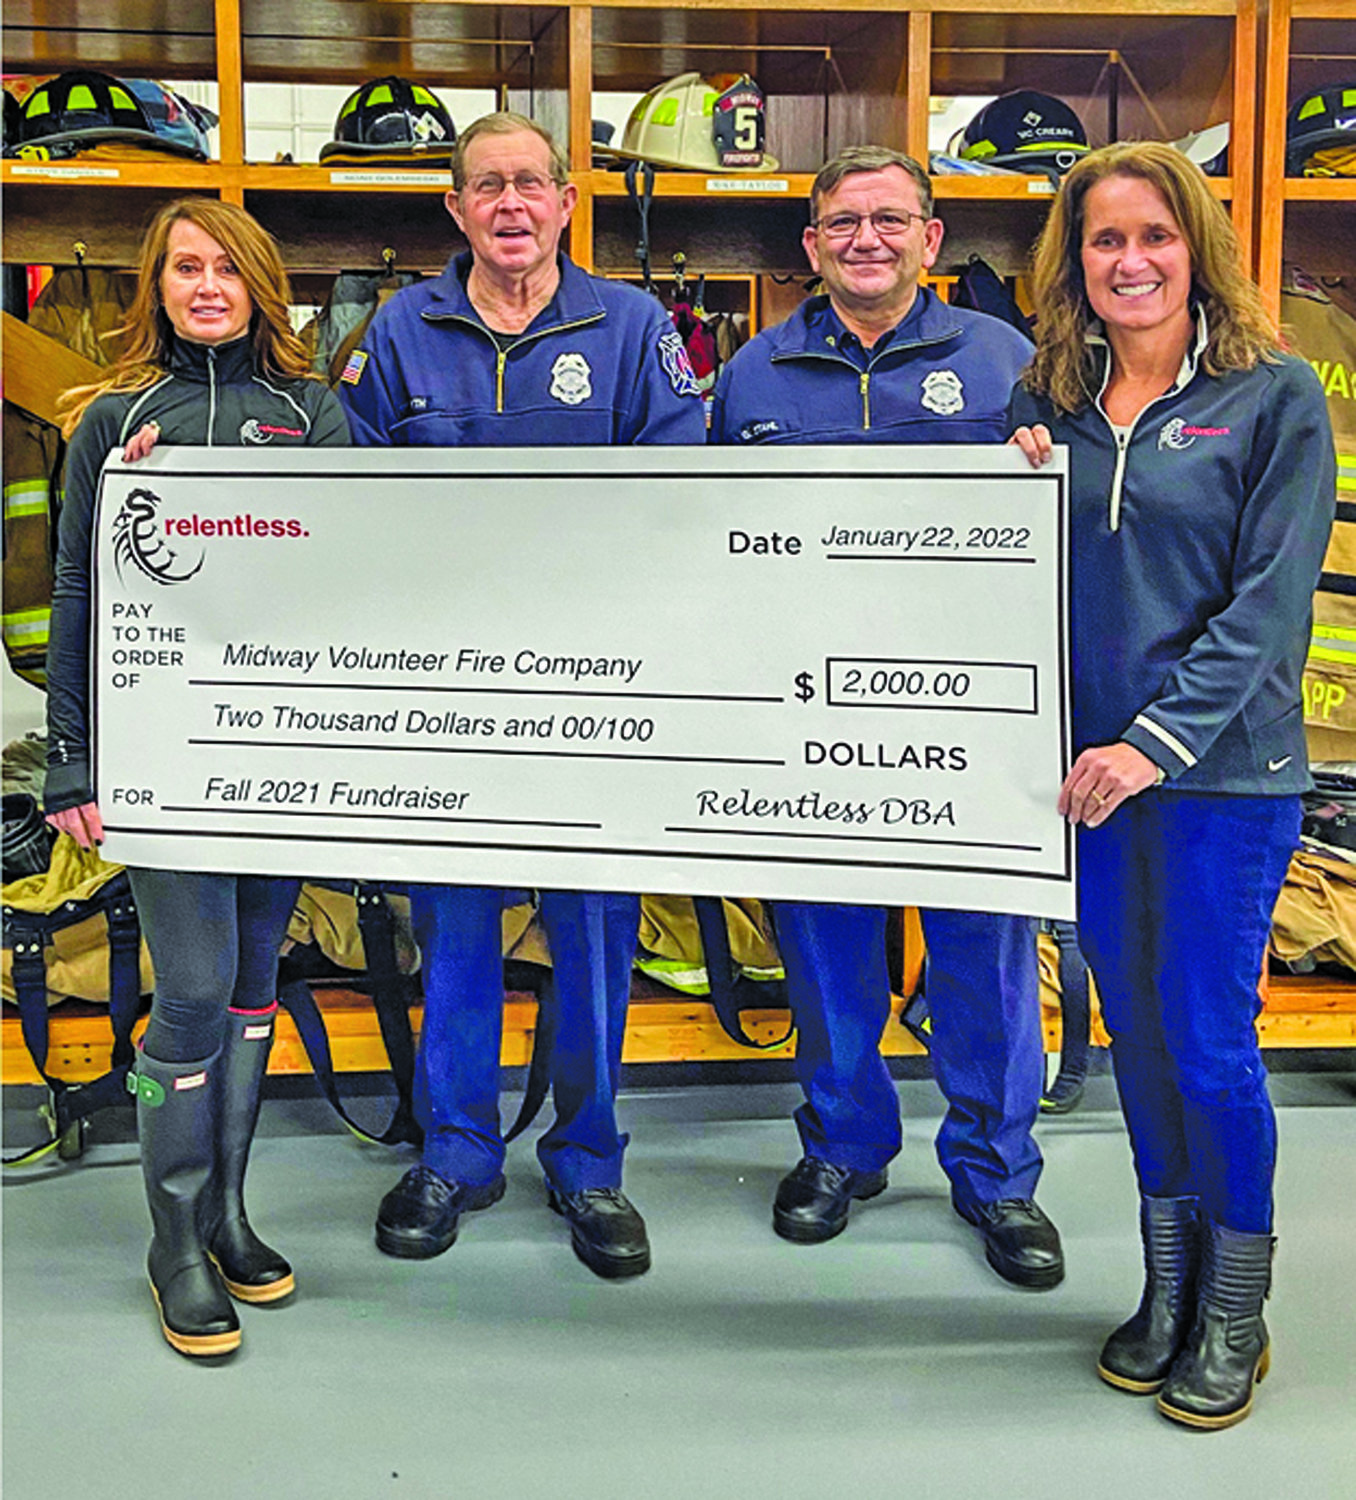 Presenting the donation check were Stephanie Leister of the Paddlers Fund Raising Committee, left, and Heather Sullivan, Relentless president. Receiving the donation for Midway were Lee Forsyth, president, left, and George Stahl, chief.